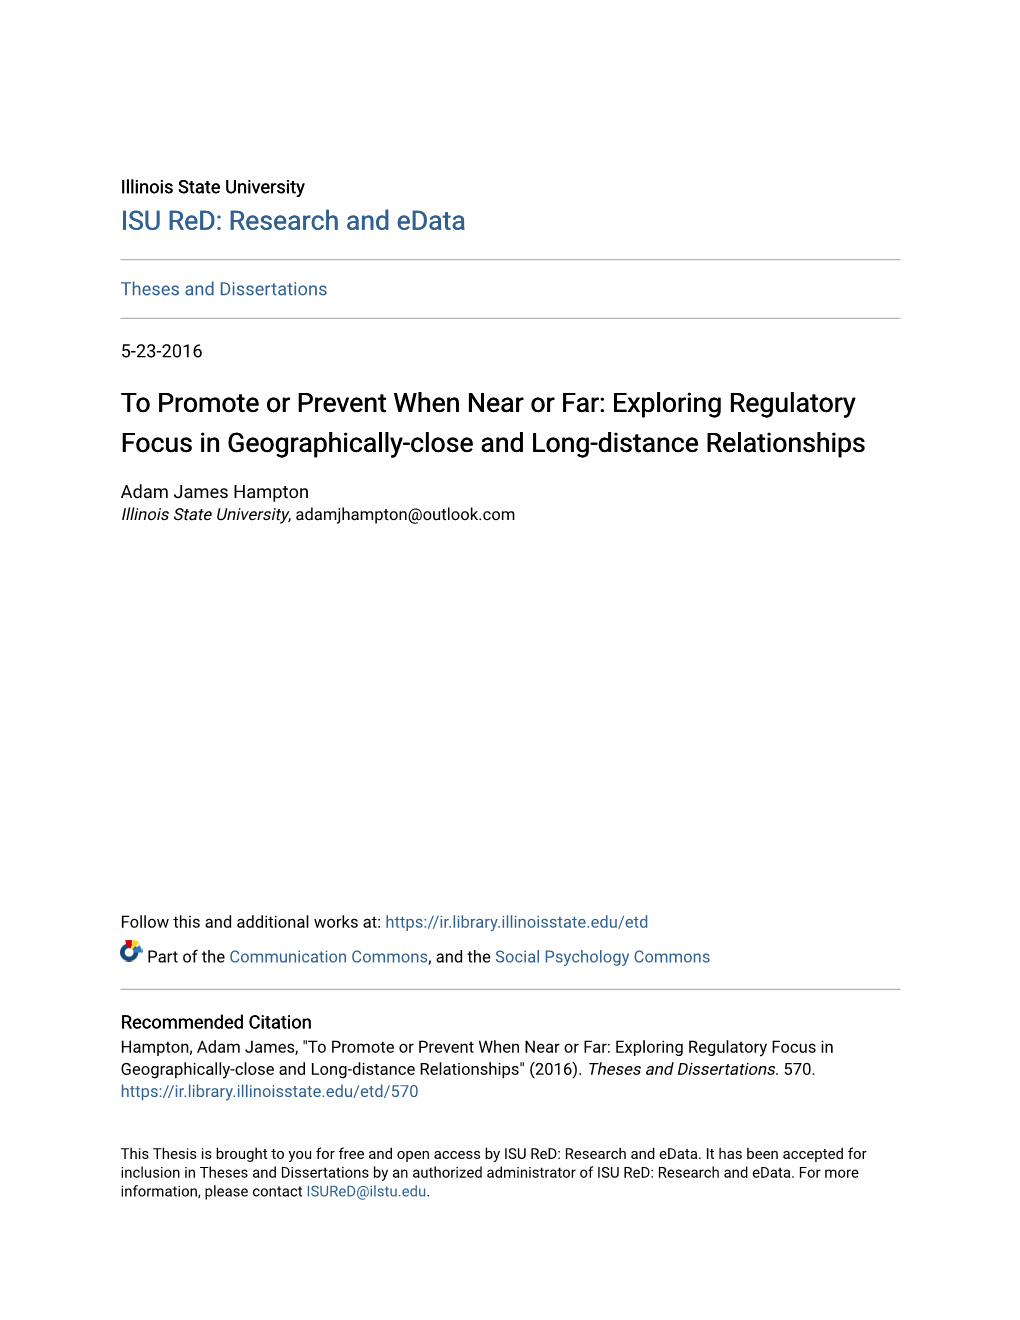 Exploring Regulatory Focus in Geographically-Close and Long-Distance Relationships